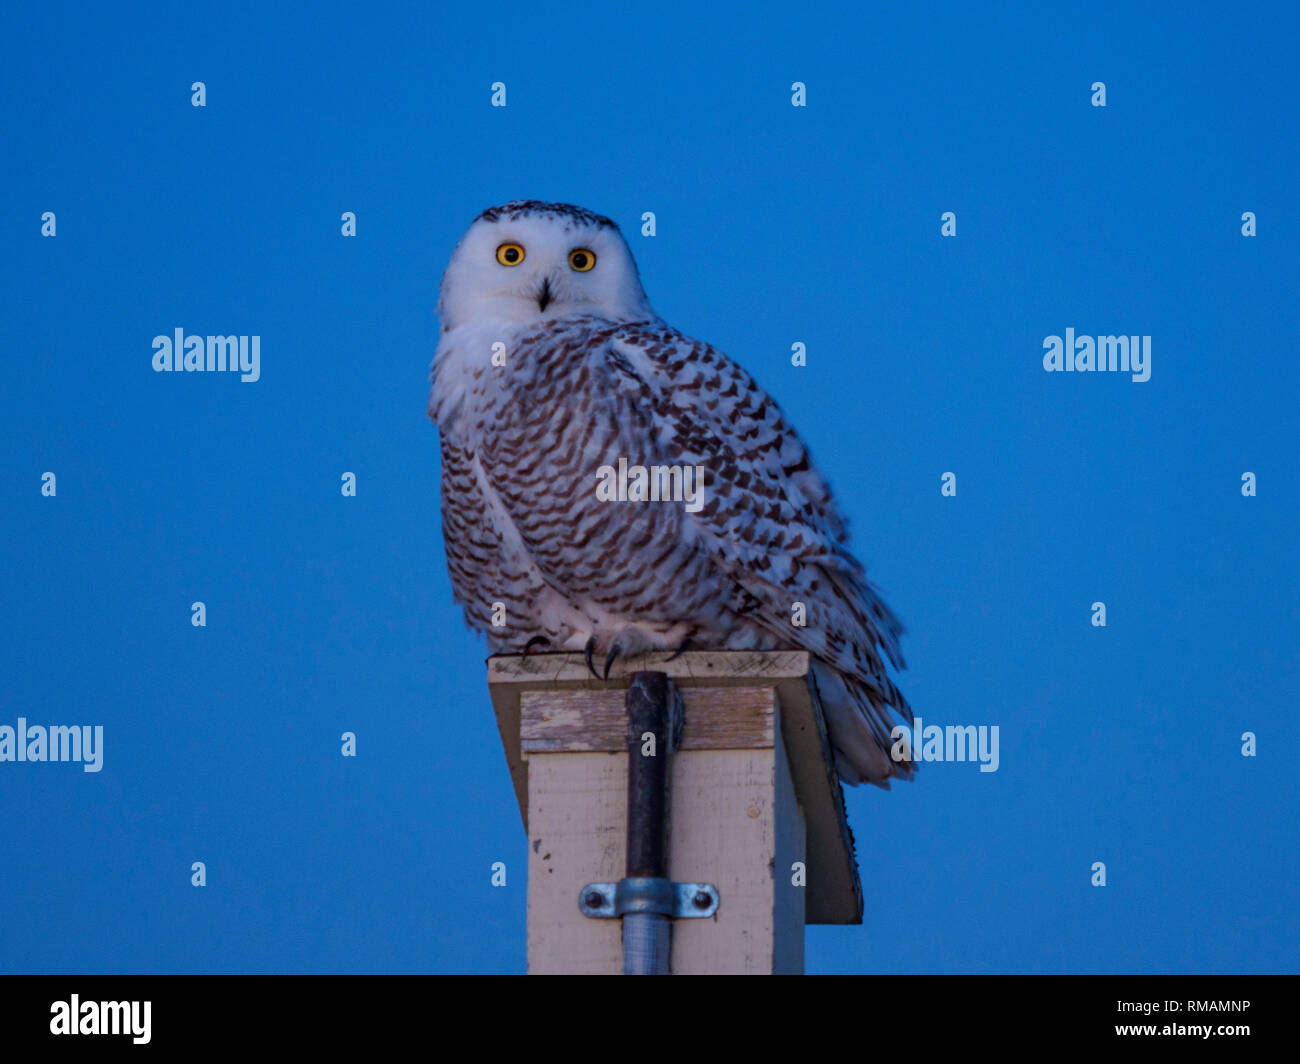 Female snow owl in the evening, Amherst Island, Ontario Stock Photo